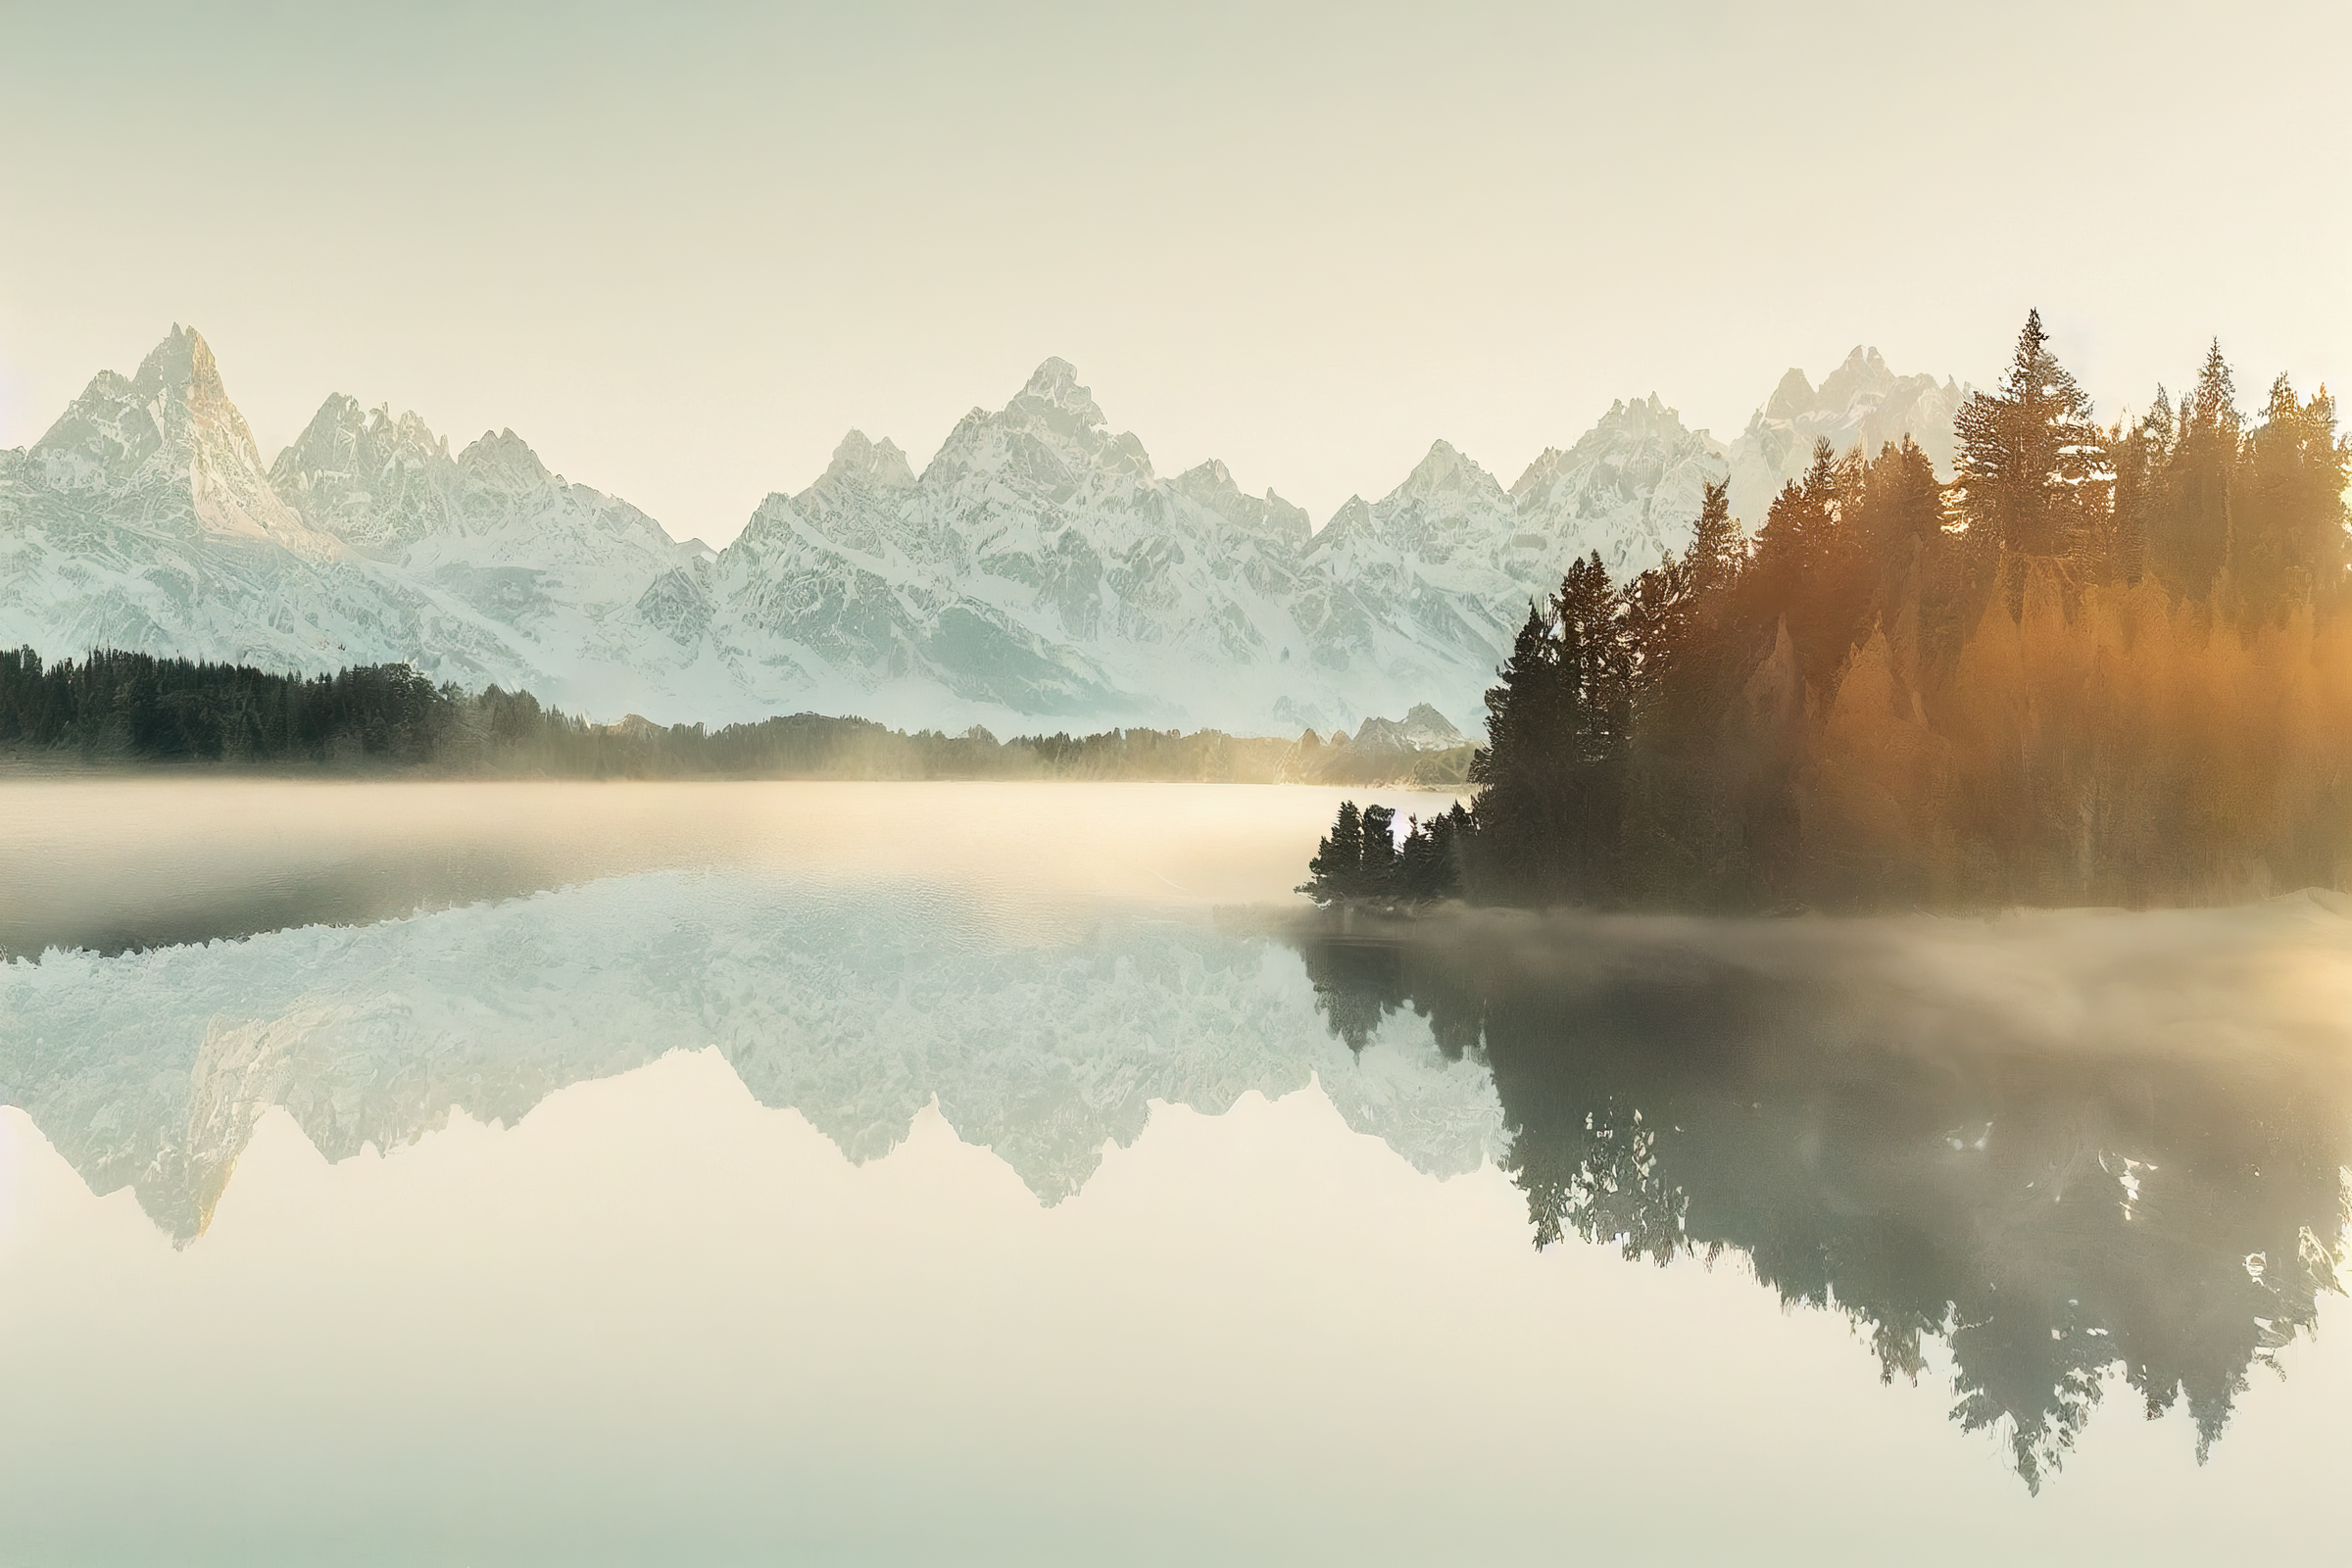 Serene image of the teton mountains, lake and forest